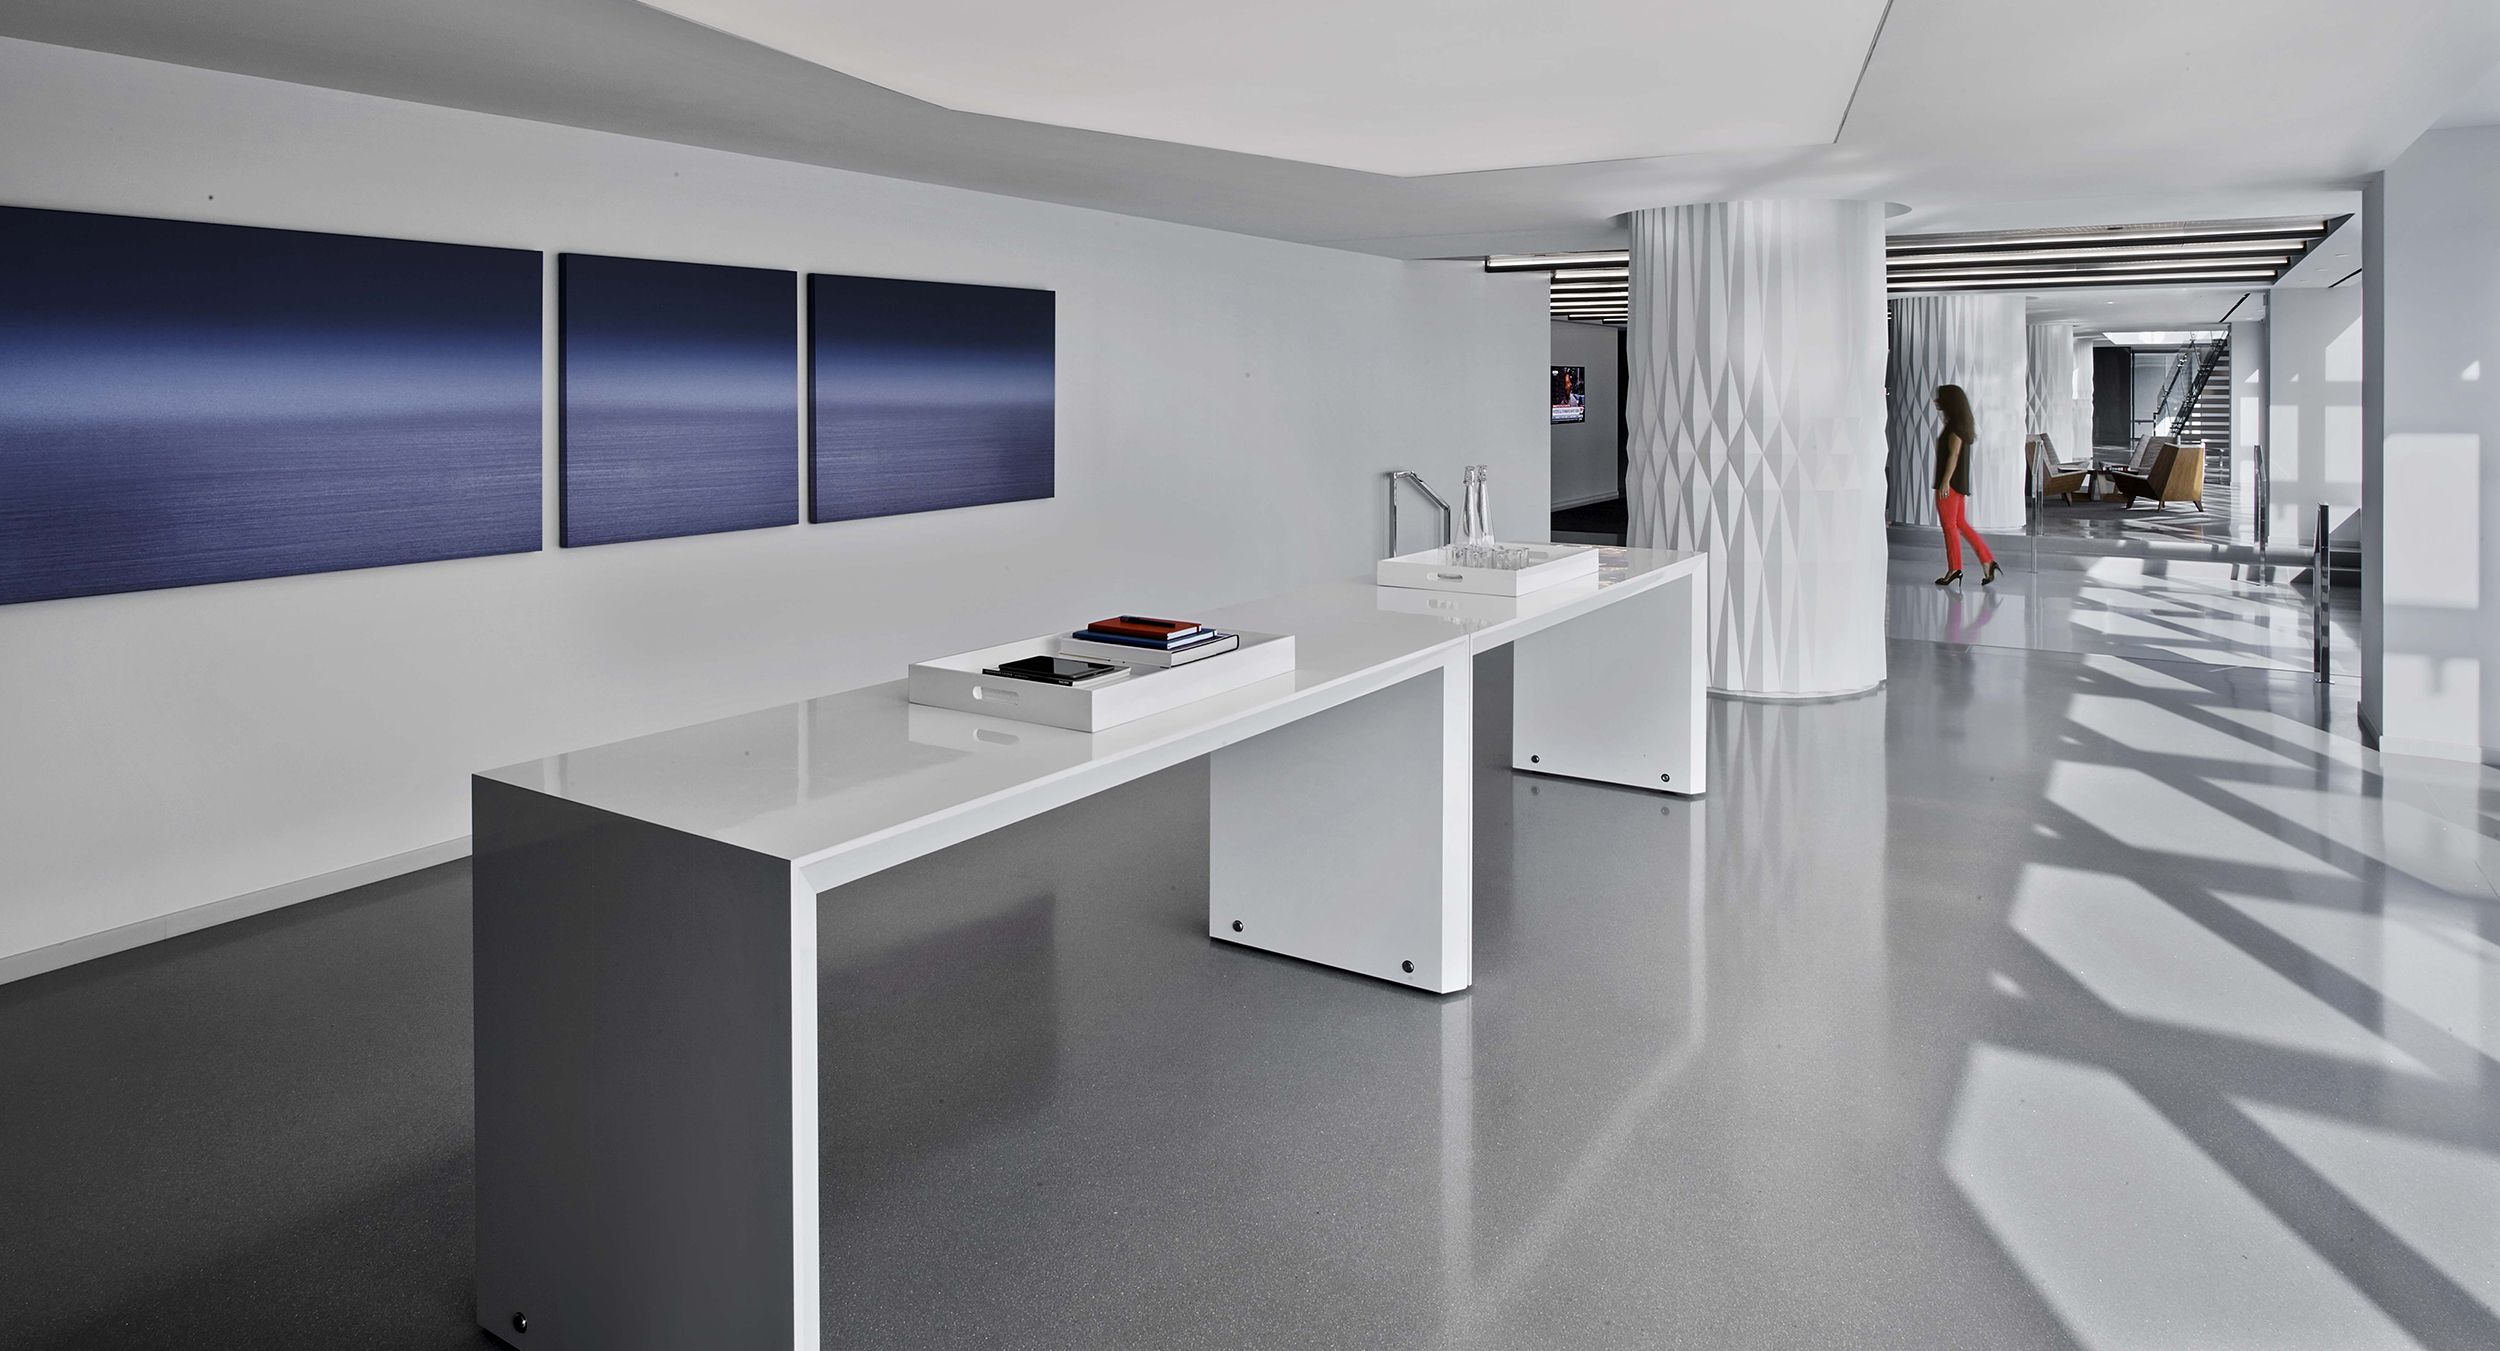 HUGO tables were custom-designed to meet the desired project aesthetics.